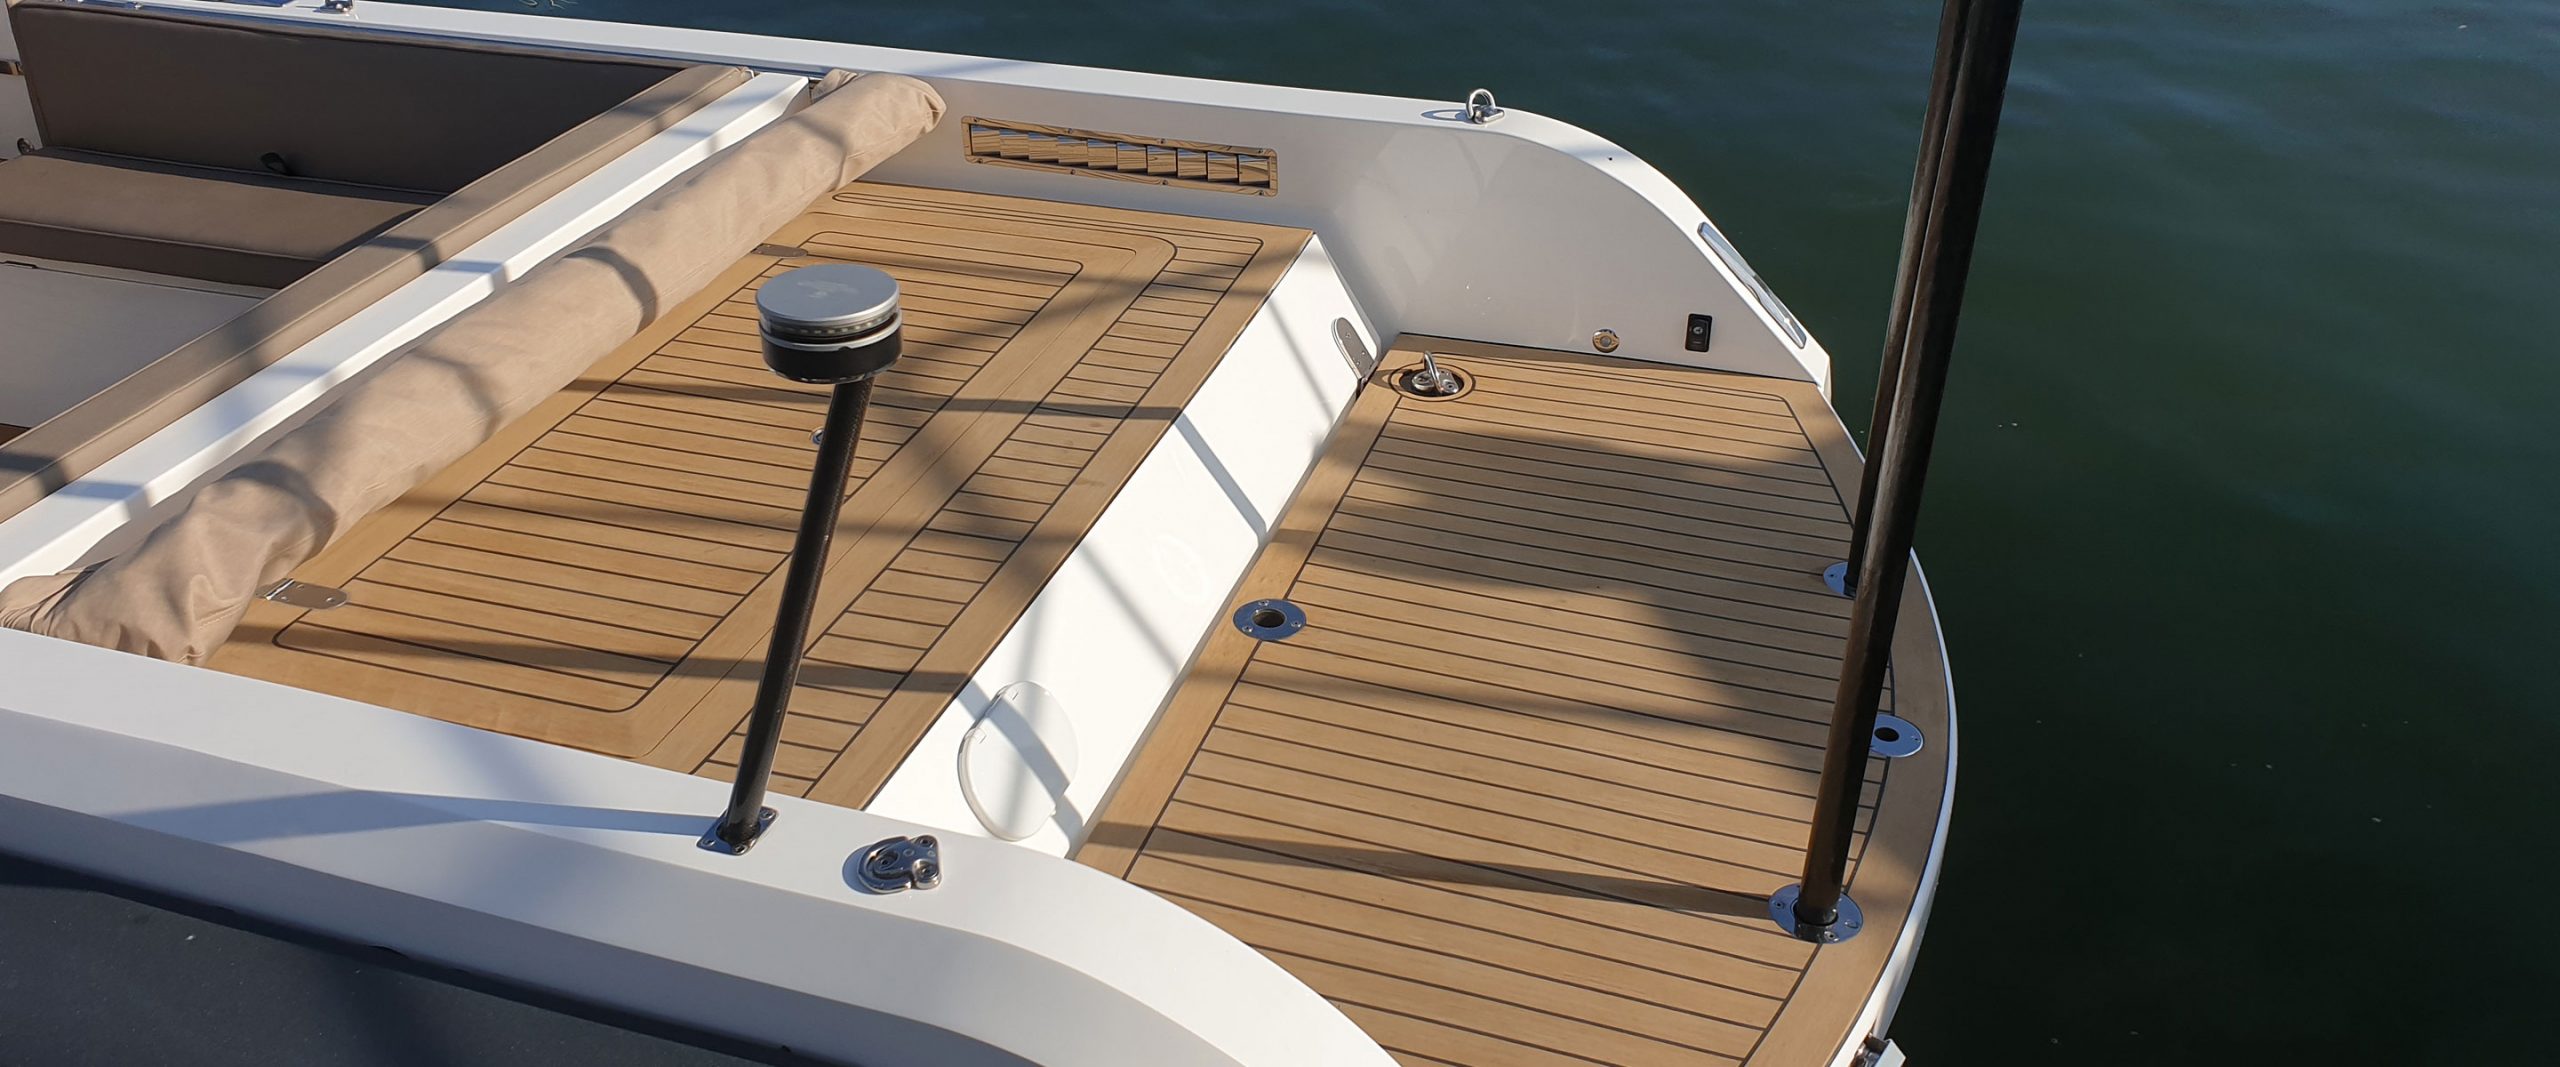 Boat fitted with Flexiteek 2G